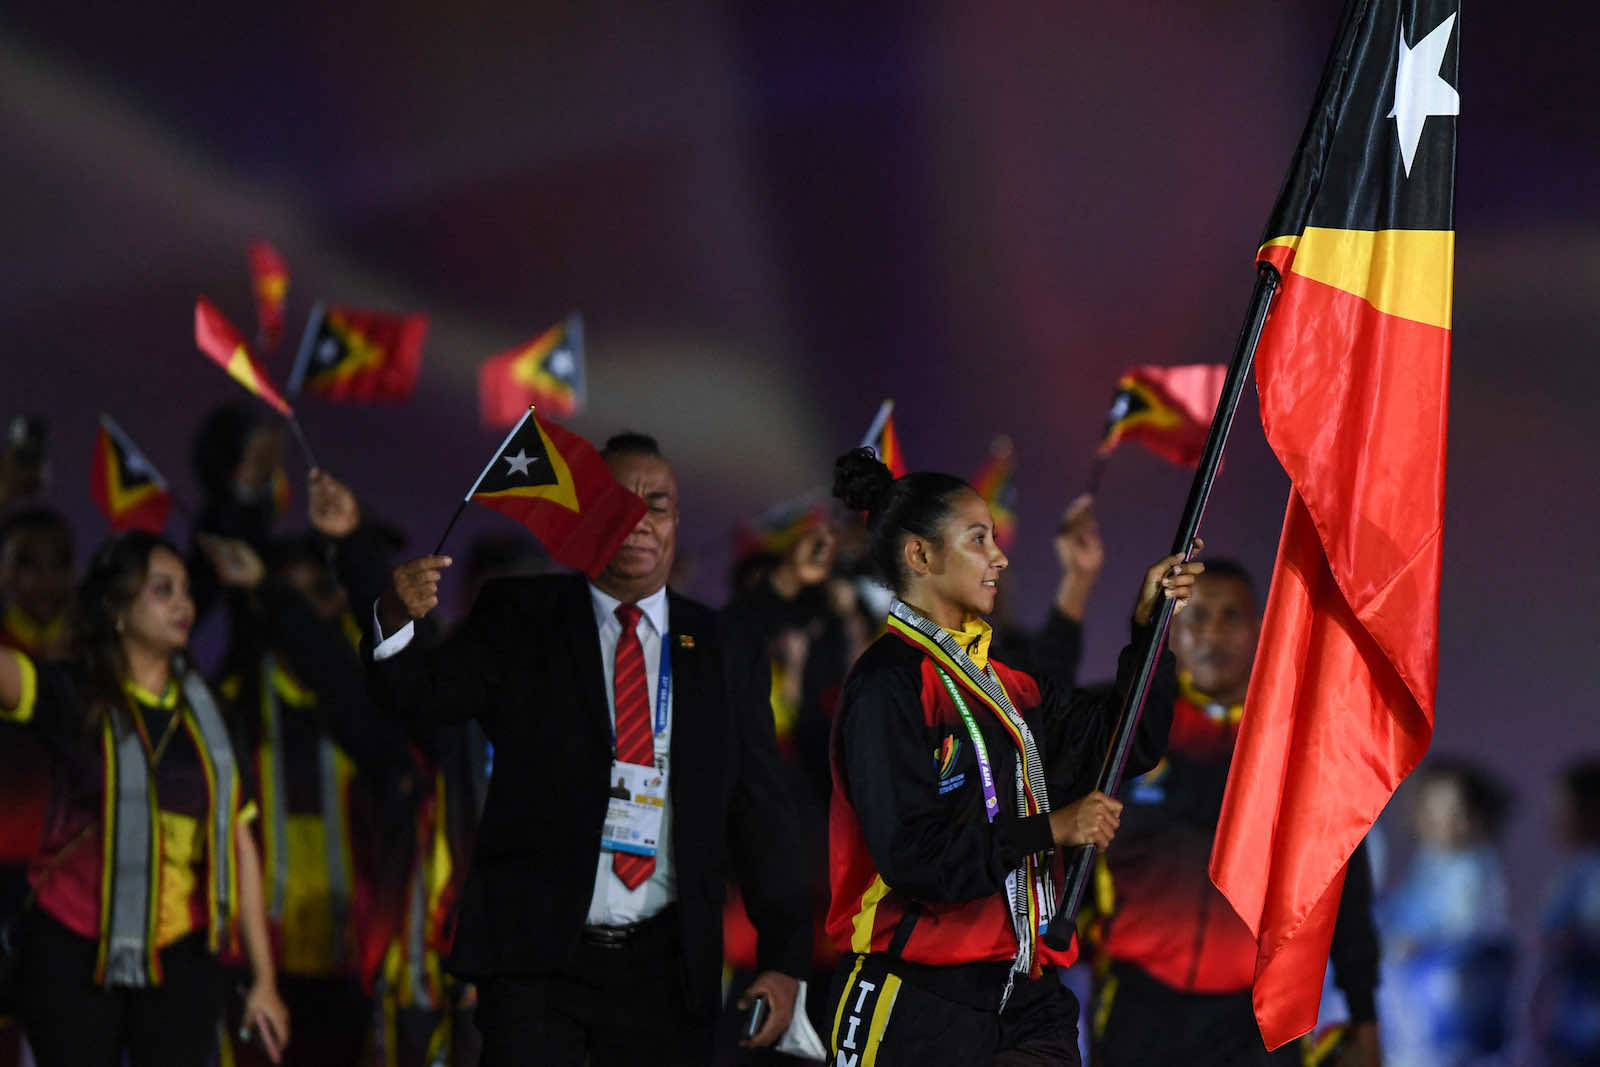 The Timor-Leste contingent during the opening ceremony of the 31st Southeast Asian Games at the My Dinh National Stadium in Hanoi on 12 May (Nhac Nguyen/AFP via Getty Images)